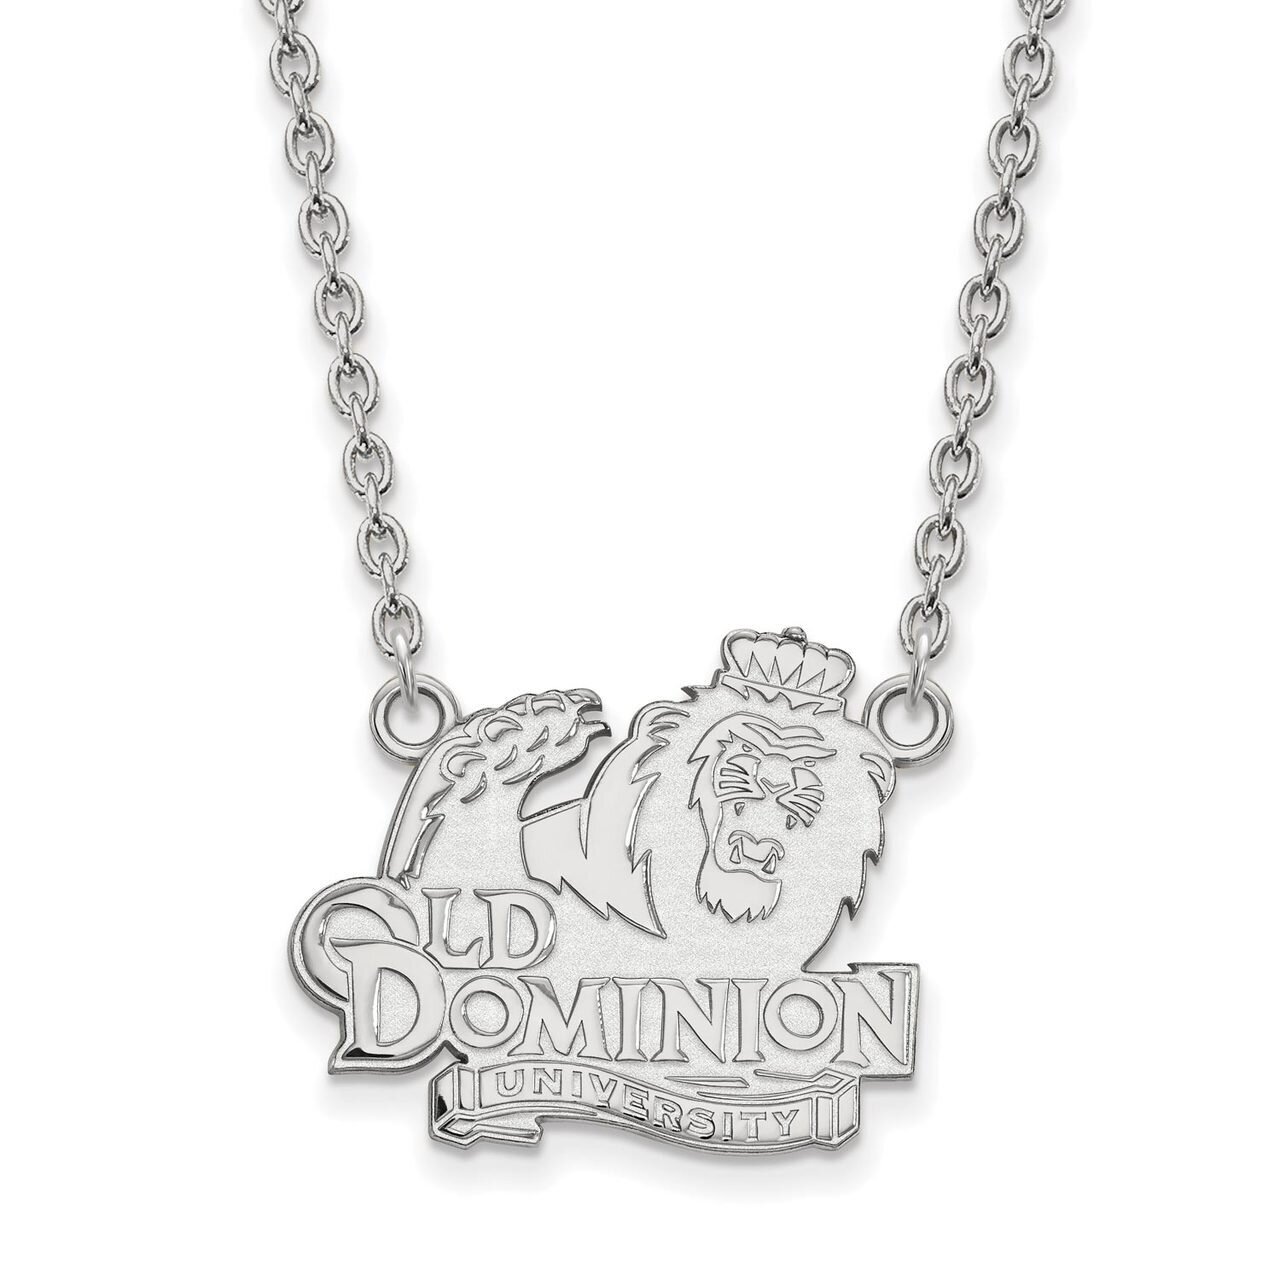 Old Dominion University Large Pendant with Chain Necklace 14k White Gold 4W012ODU-18